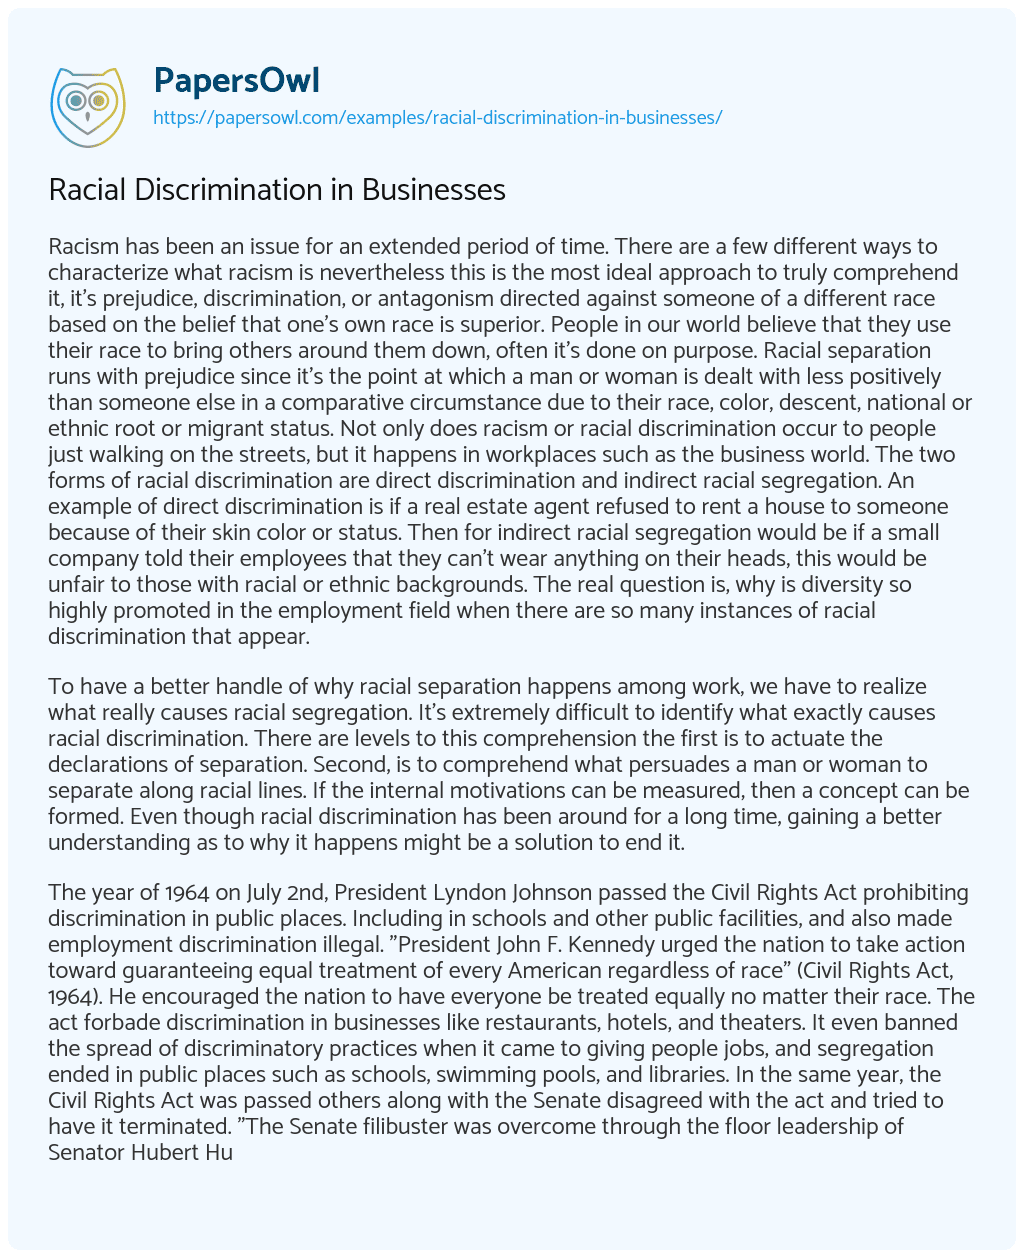 Essay on Racial Discrimination in Businesses